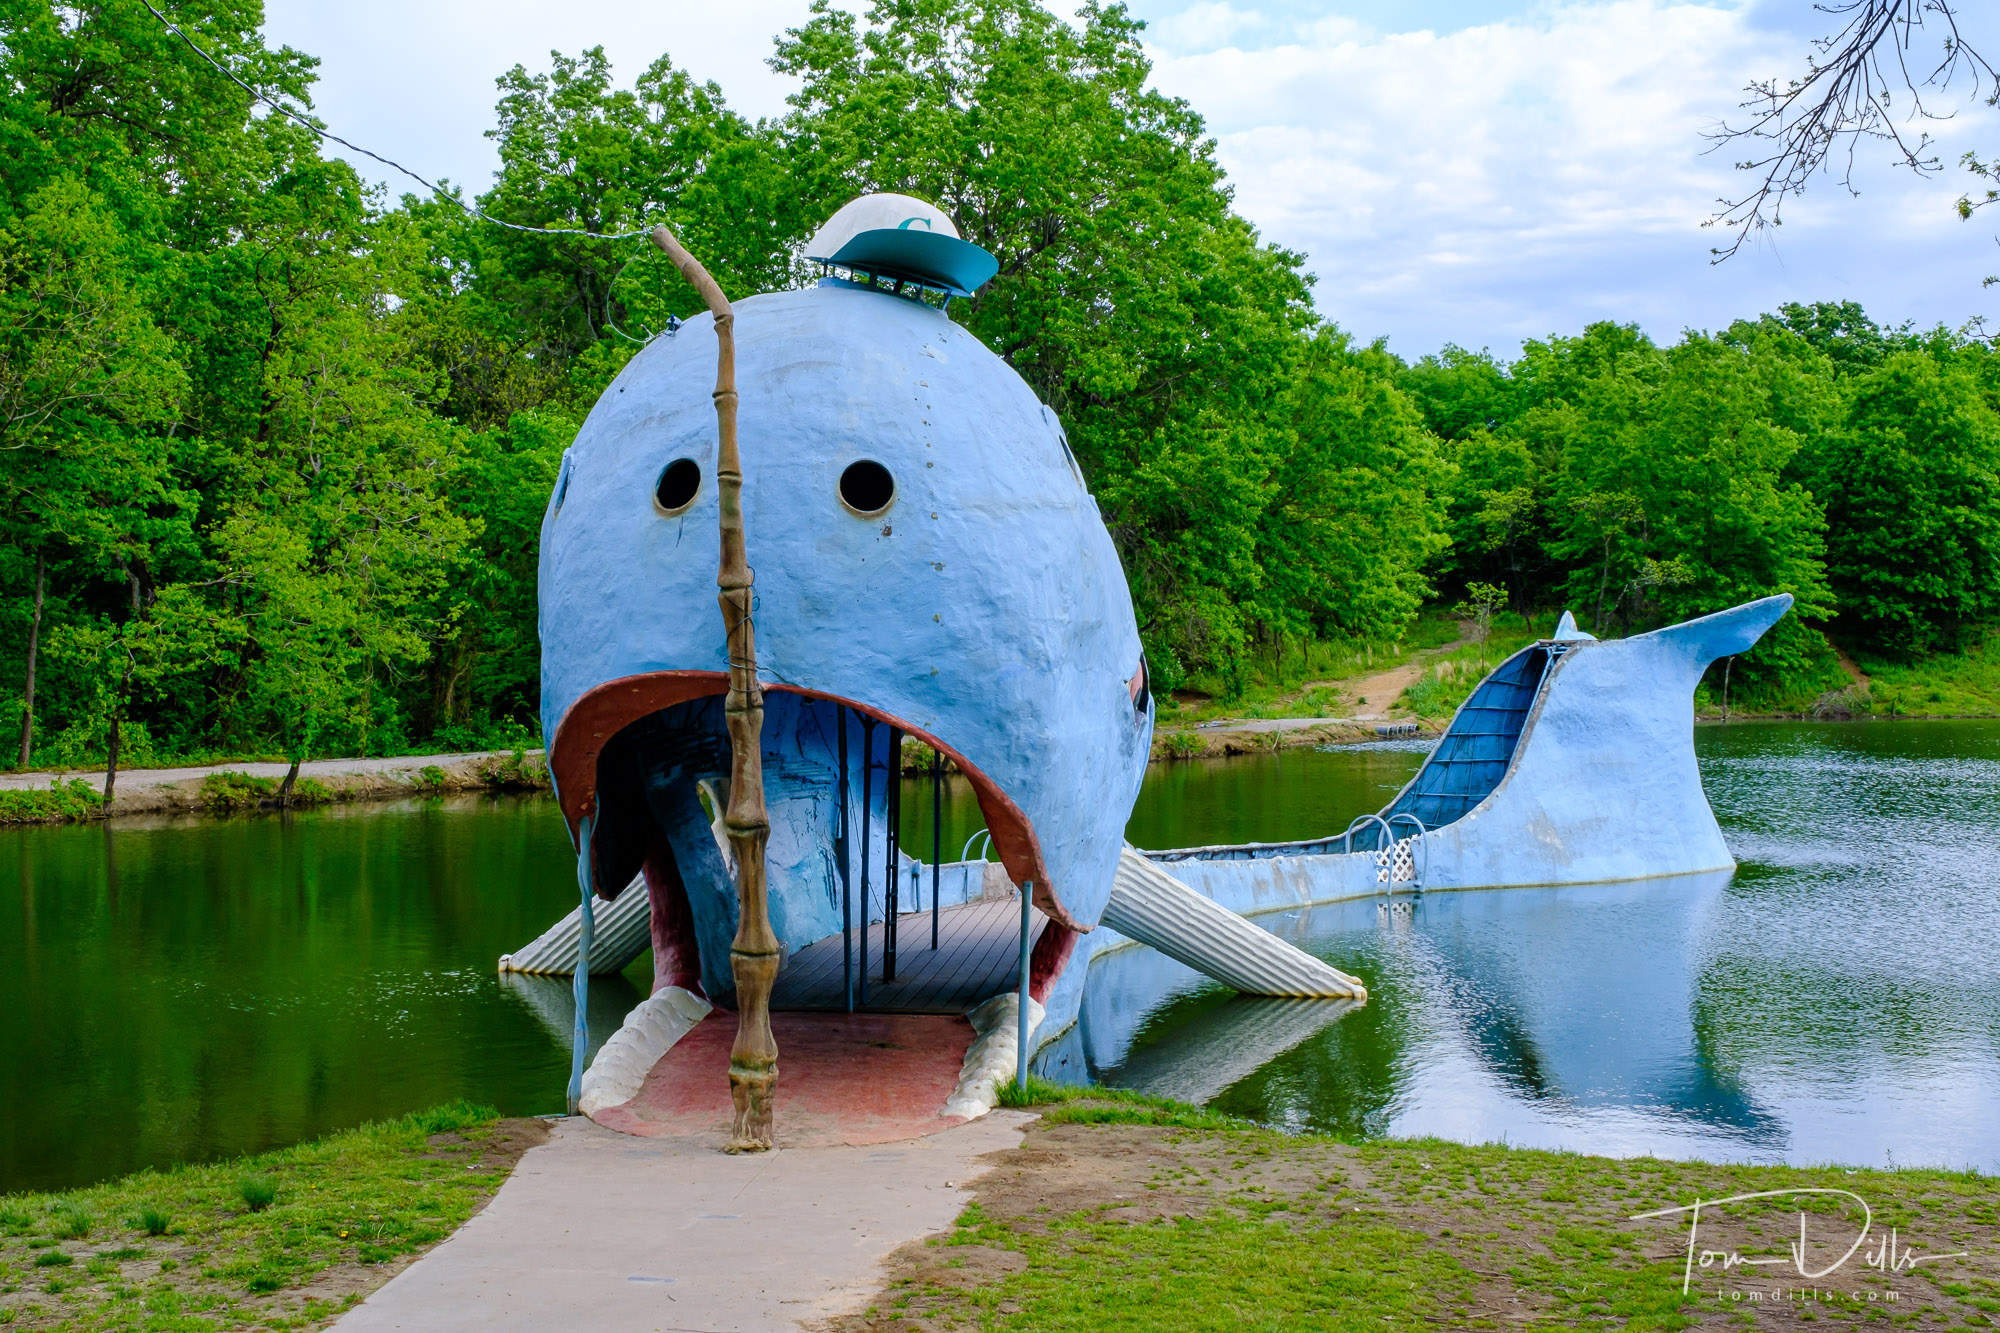 Originally built as a surprise anniversary gift, the Blue Whale of Catoosa has since become one of Route 66's most iconic roadside attractions, offering visitors the chance to climb inside and explore its interior.]]>